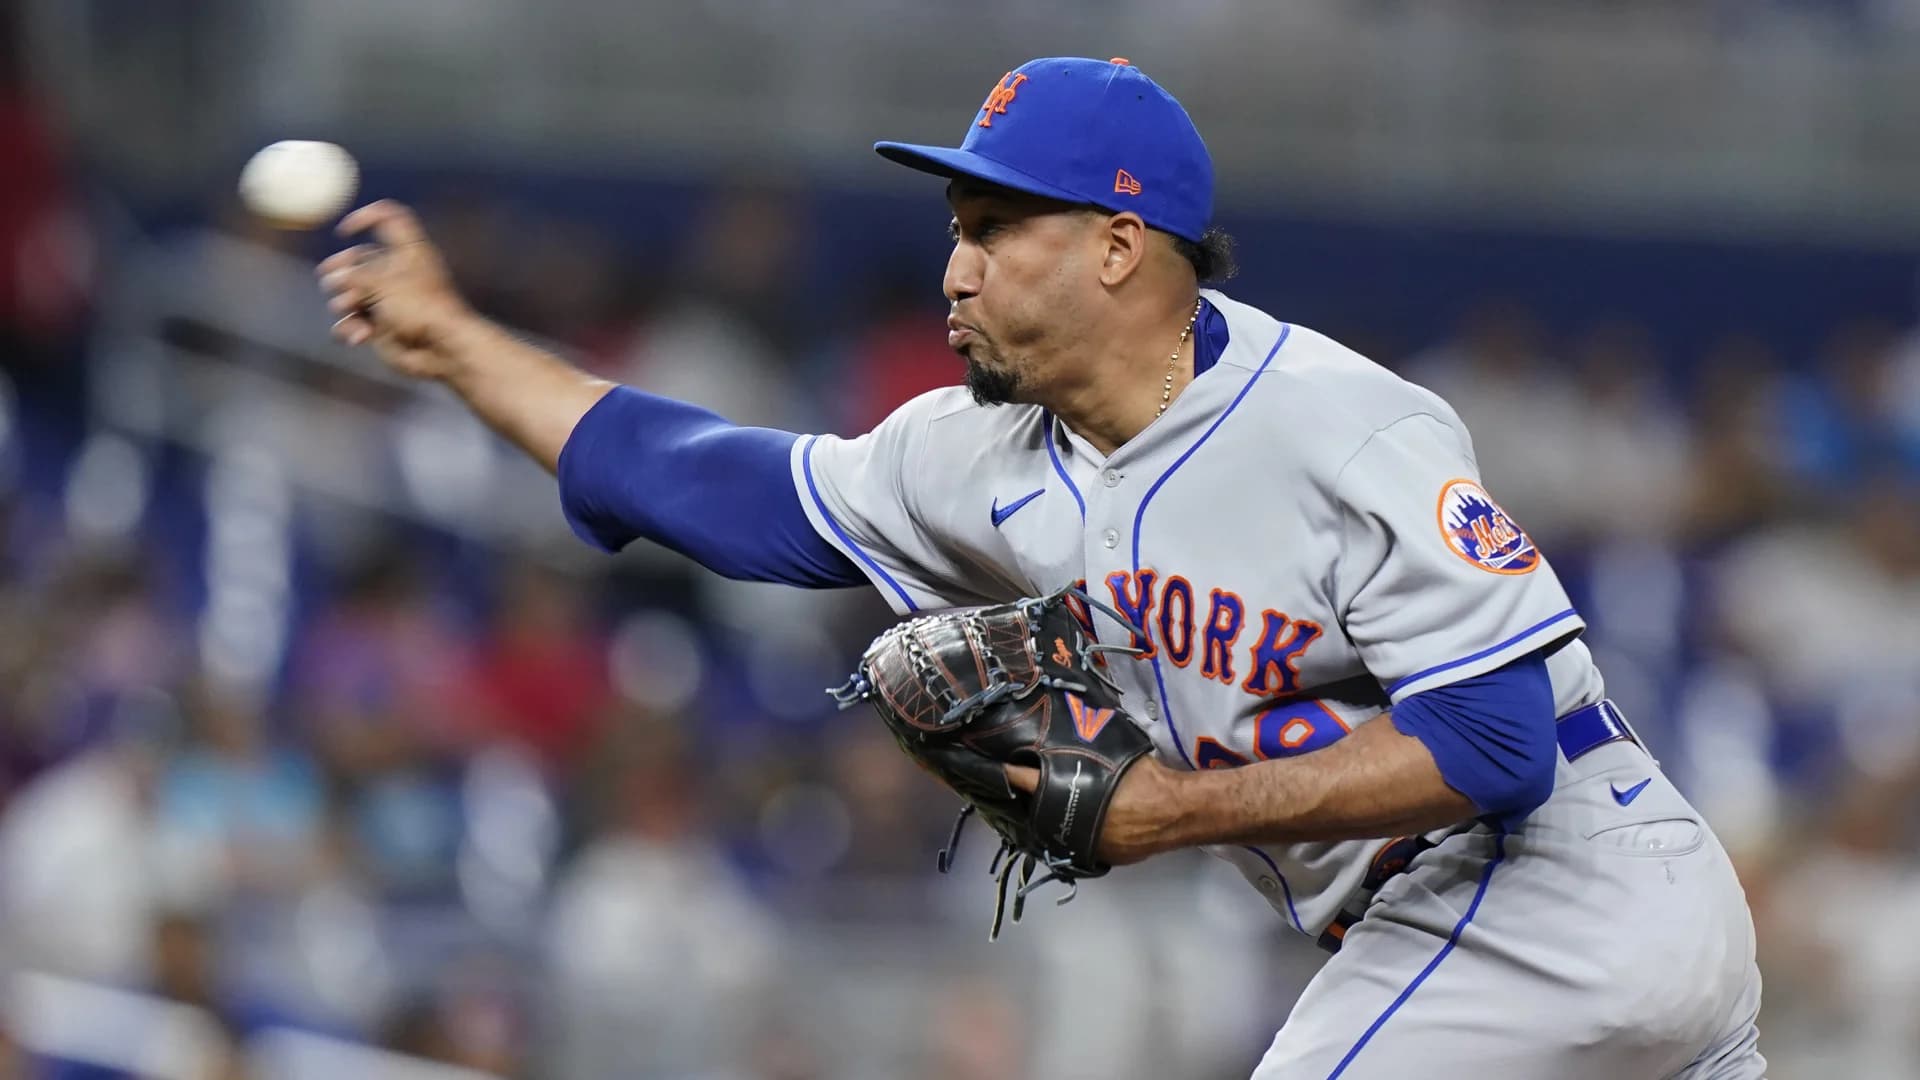 High note: Mets closer Edwin Díaz trumpets saves in sound of Citi